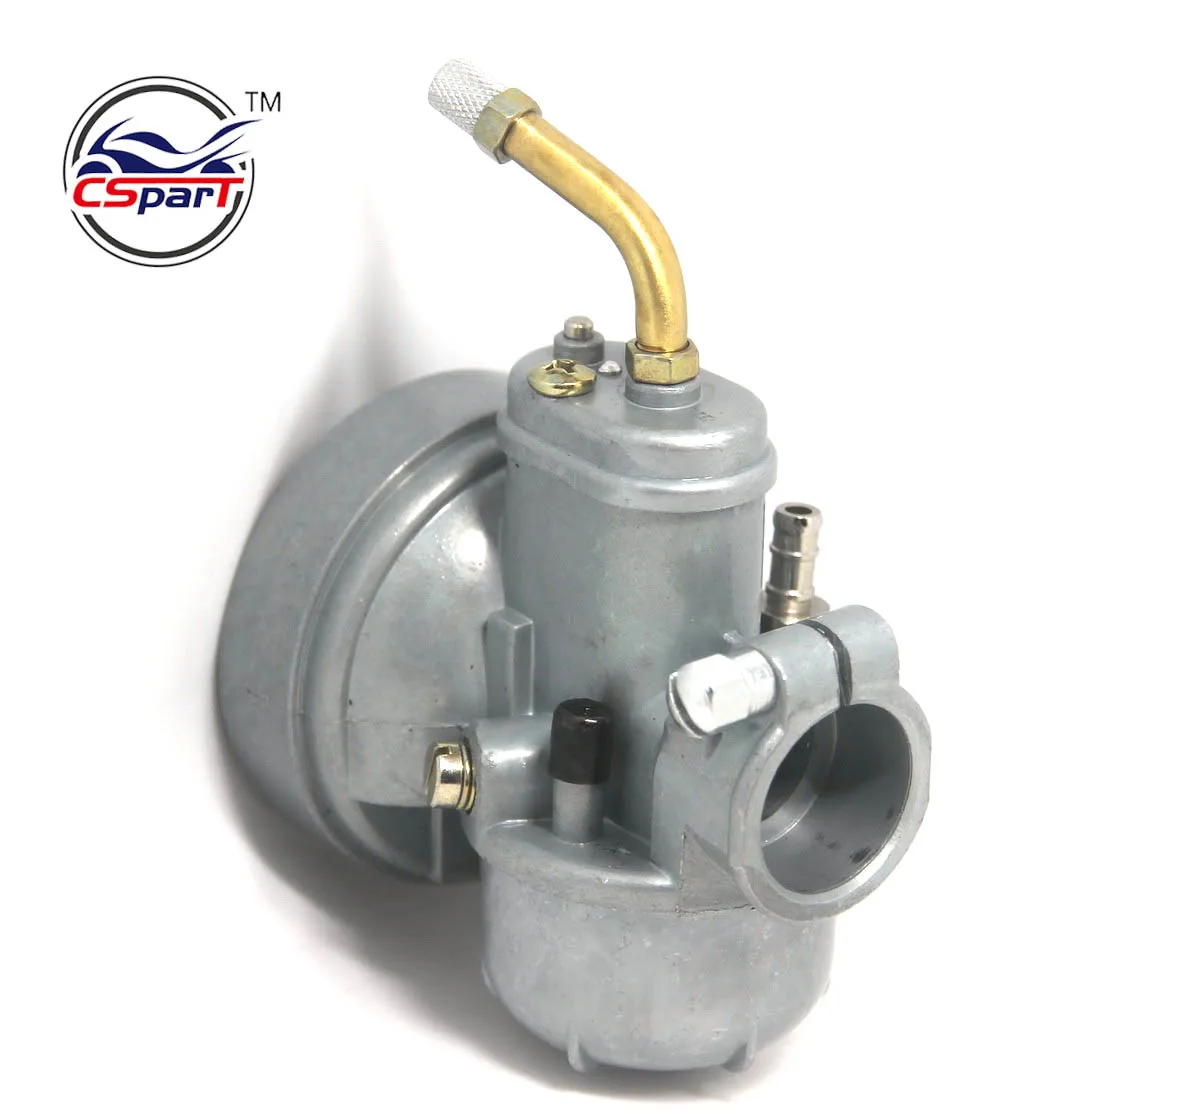 12 15 17 12mm 15mm 17mm Carburetor For Puch Bing Dax Motorcycle